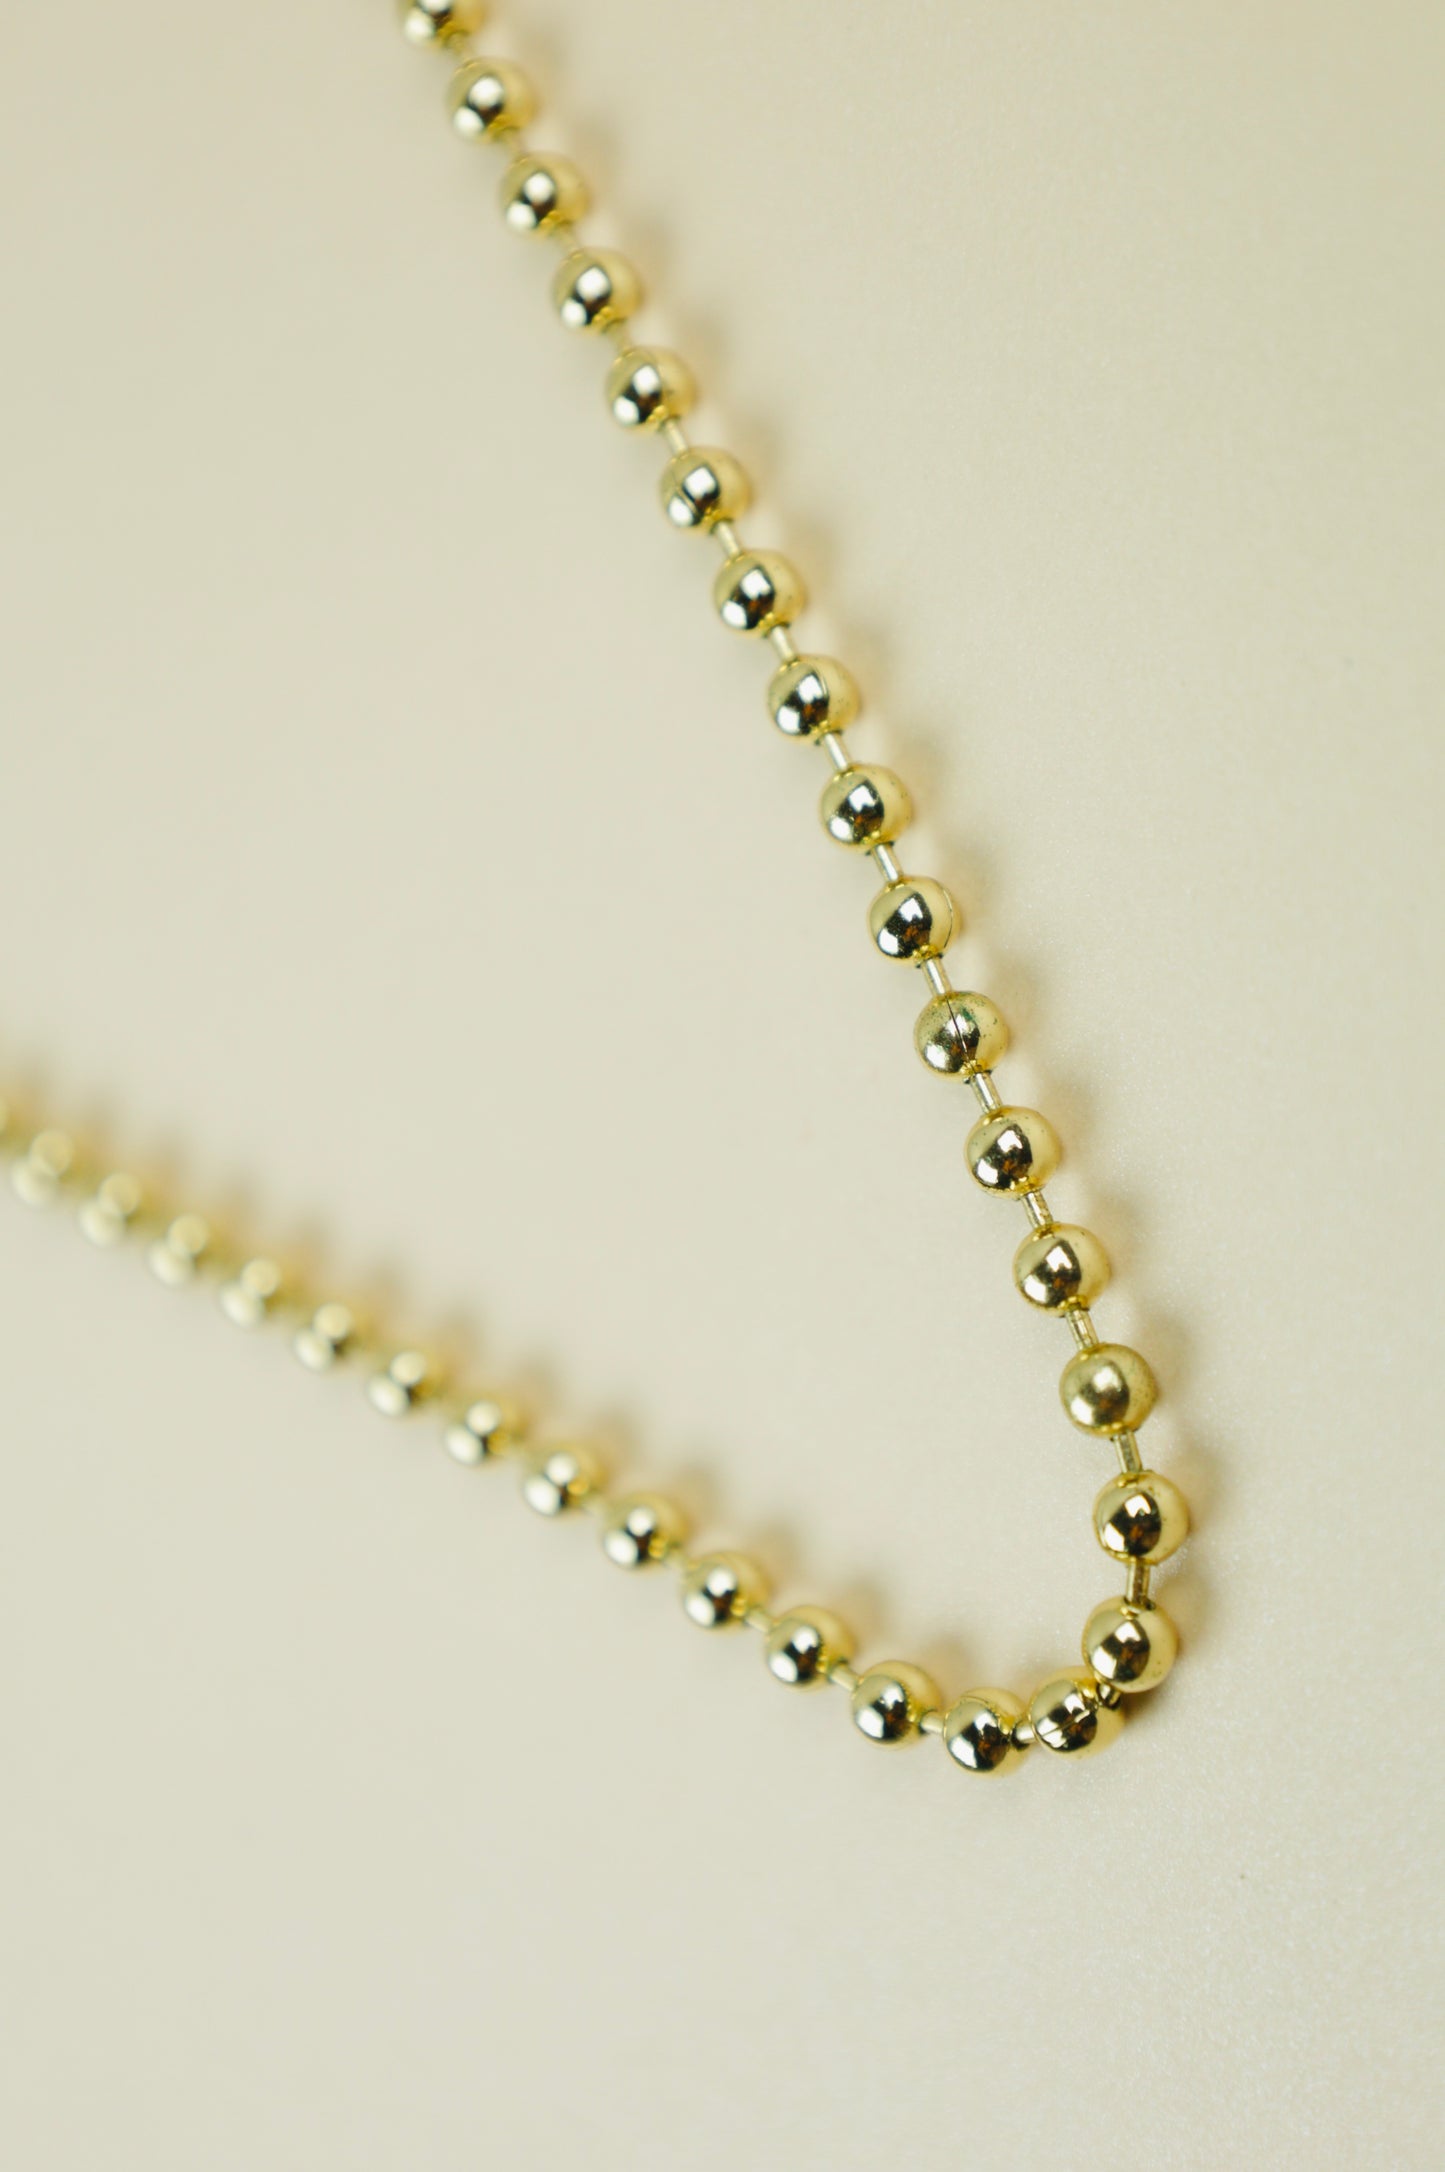 Liz Ball Chain necklace in gold